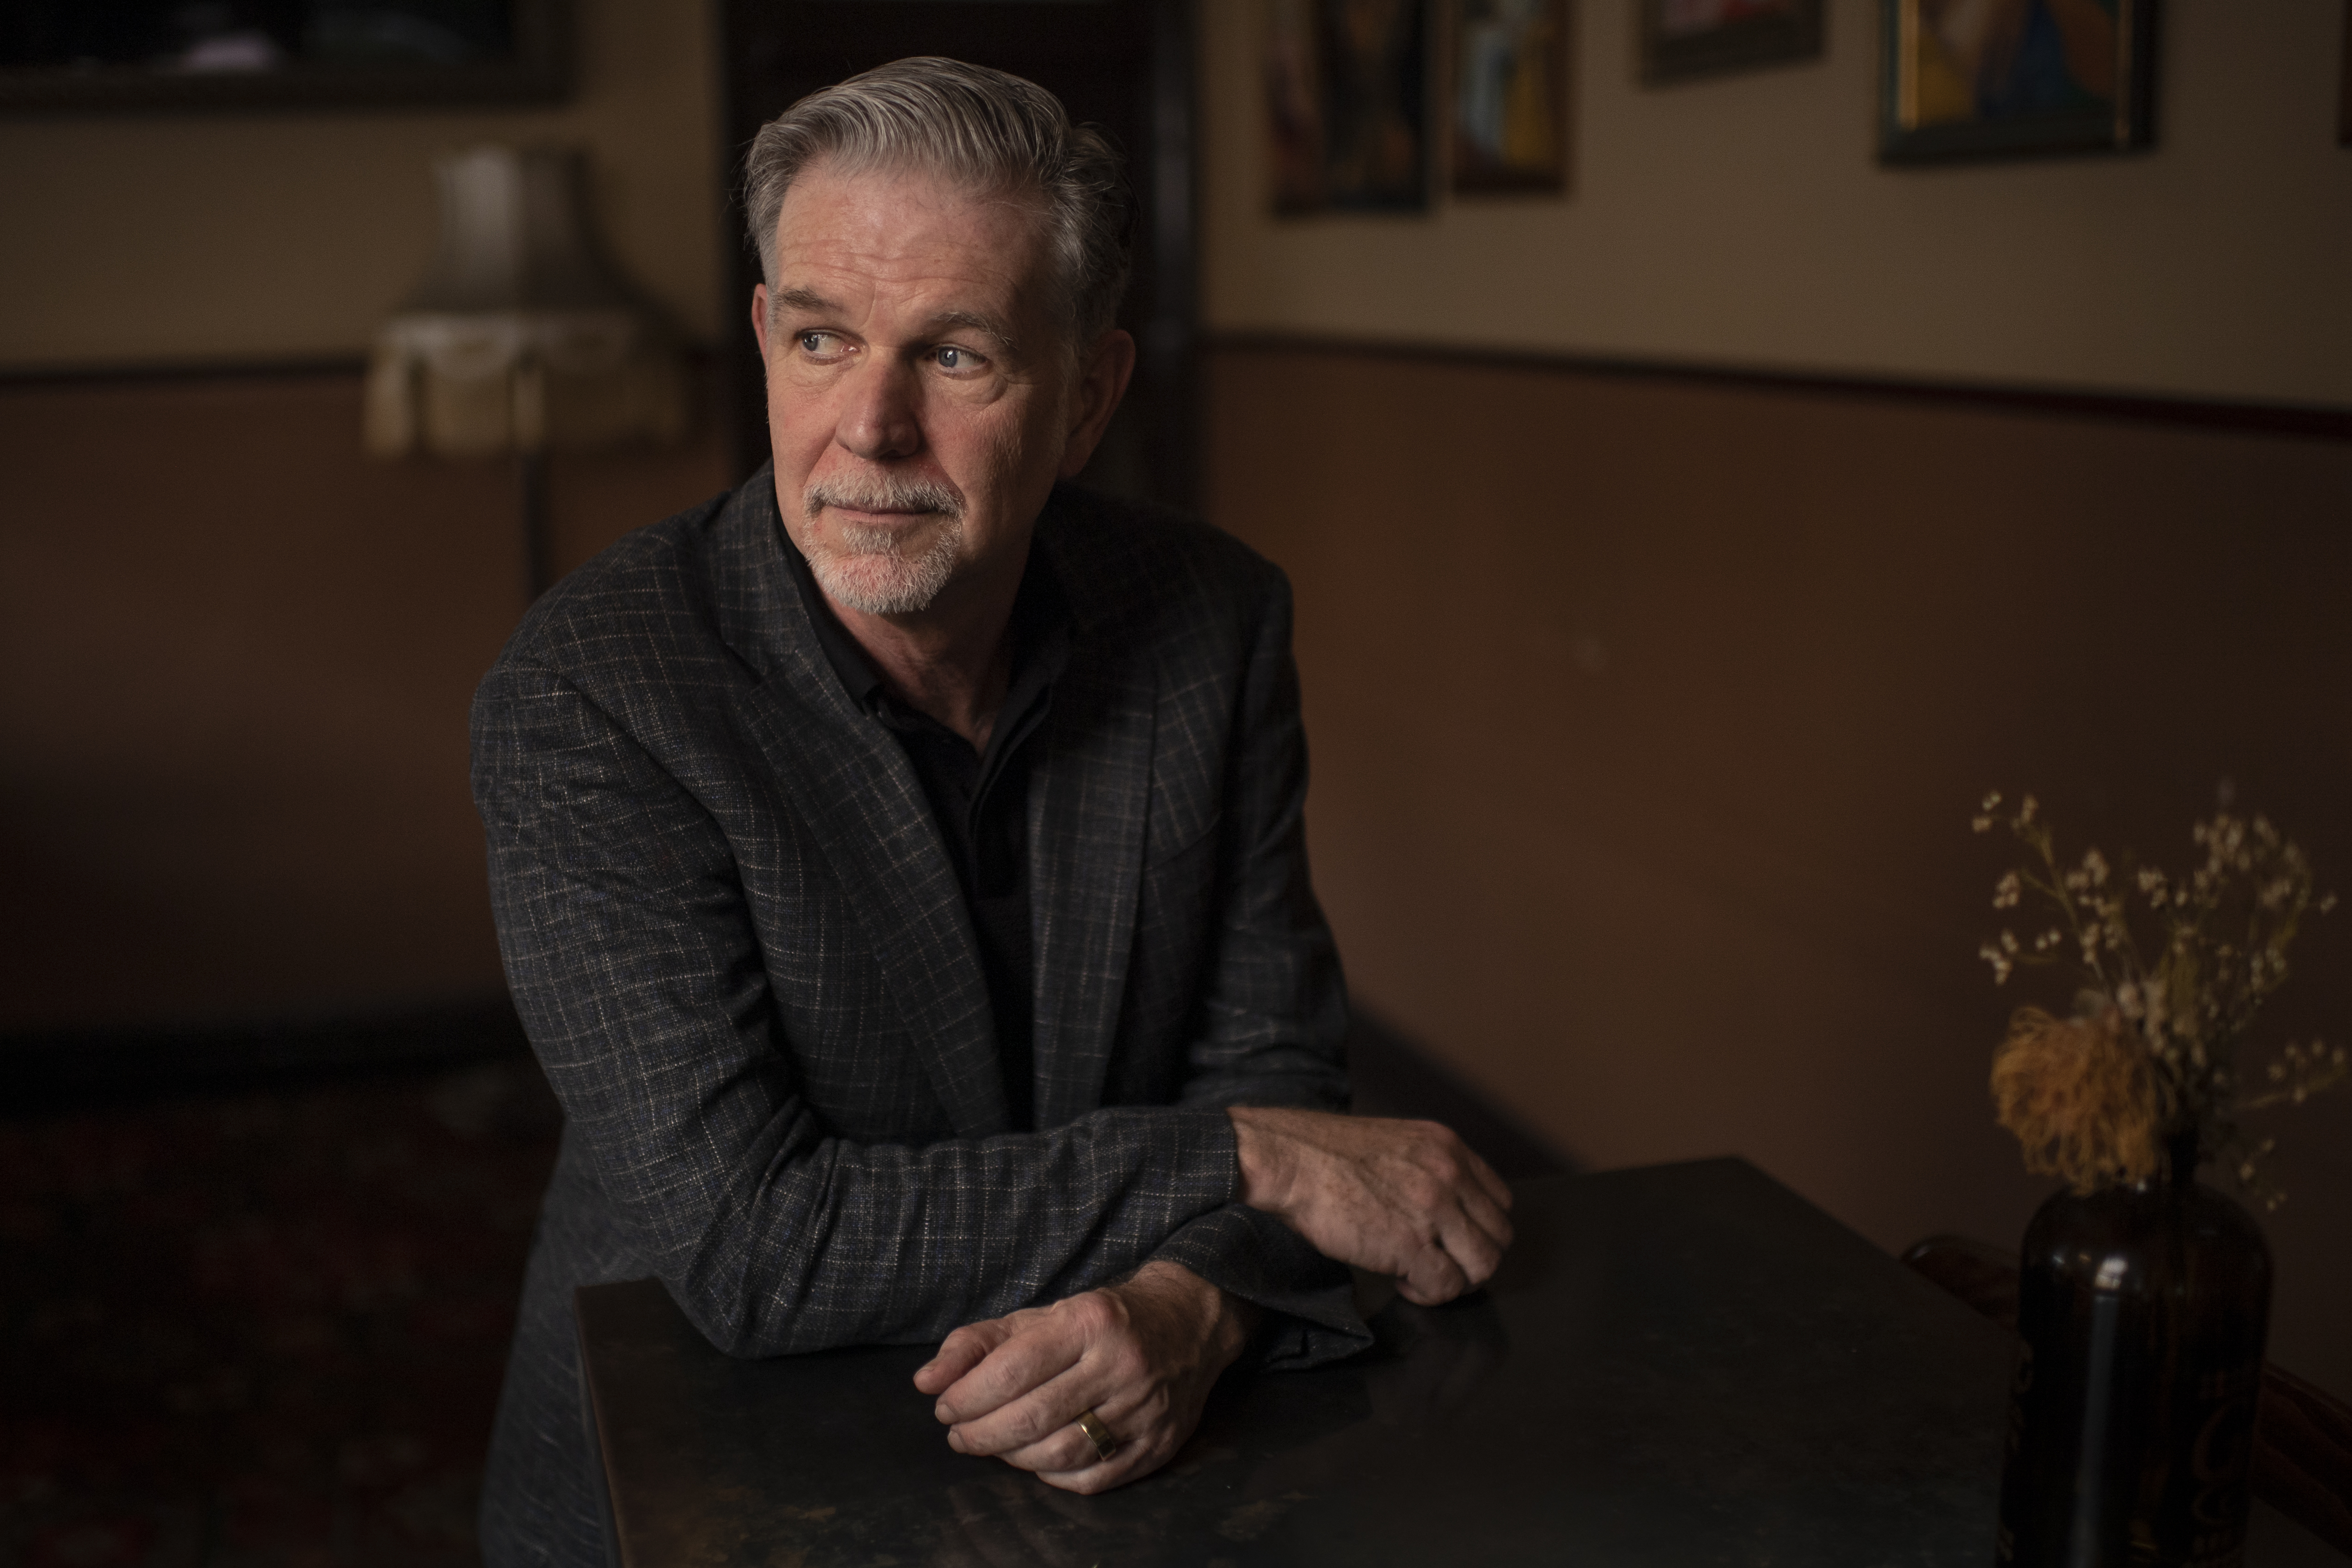 Photo of Reed Hastings, seated and with his arms crossed, looking to the side in a dark room.